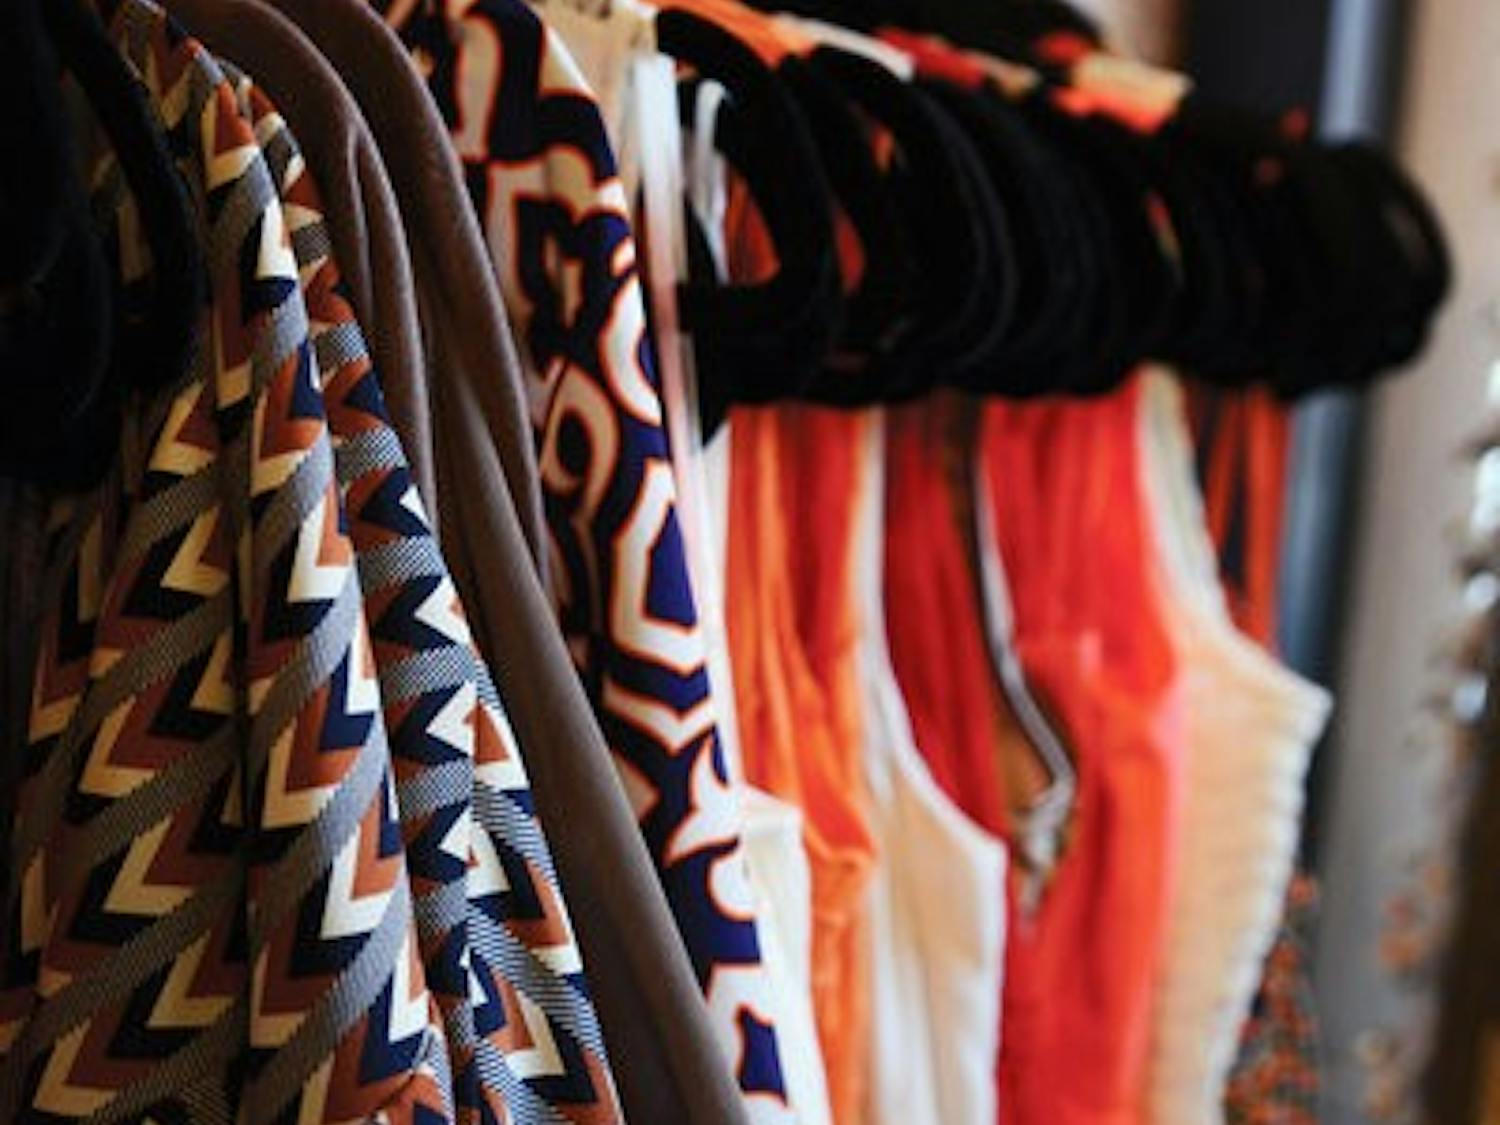 Gameday dresses hanging in Therapy Boutique.